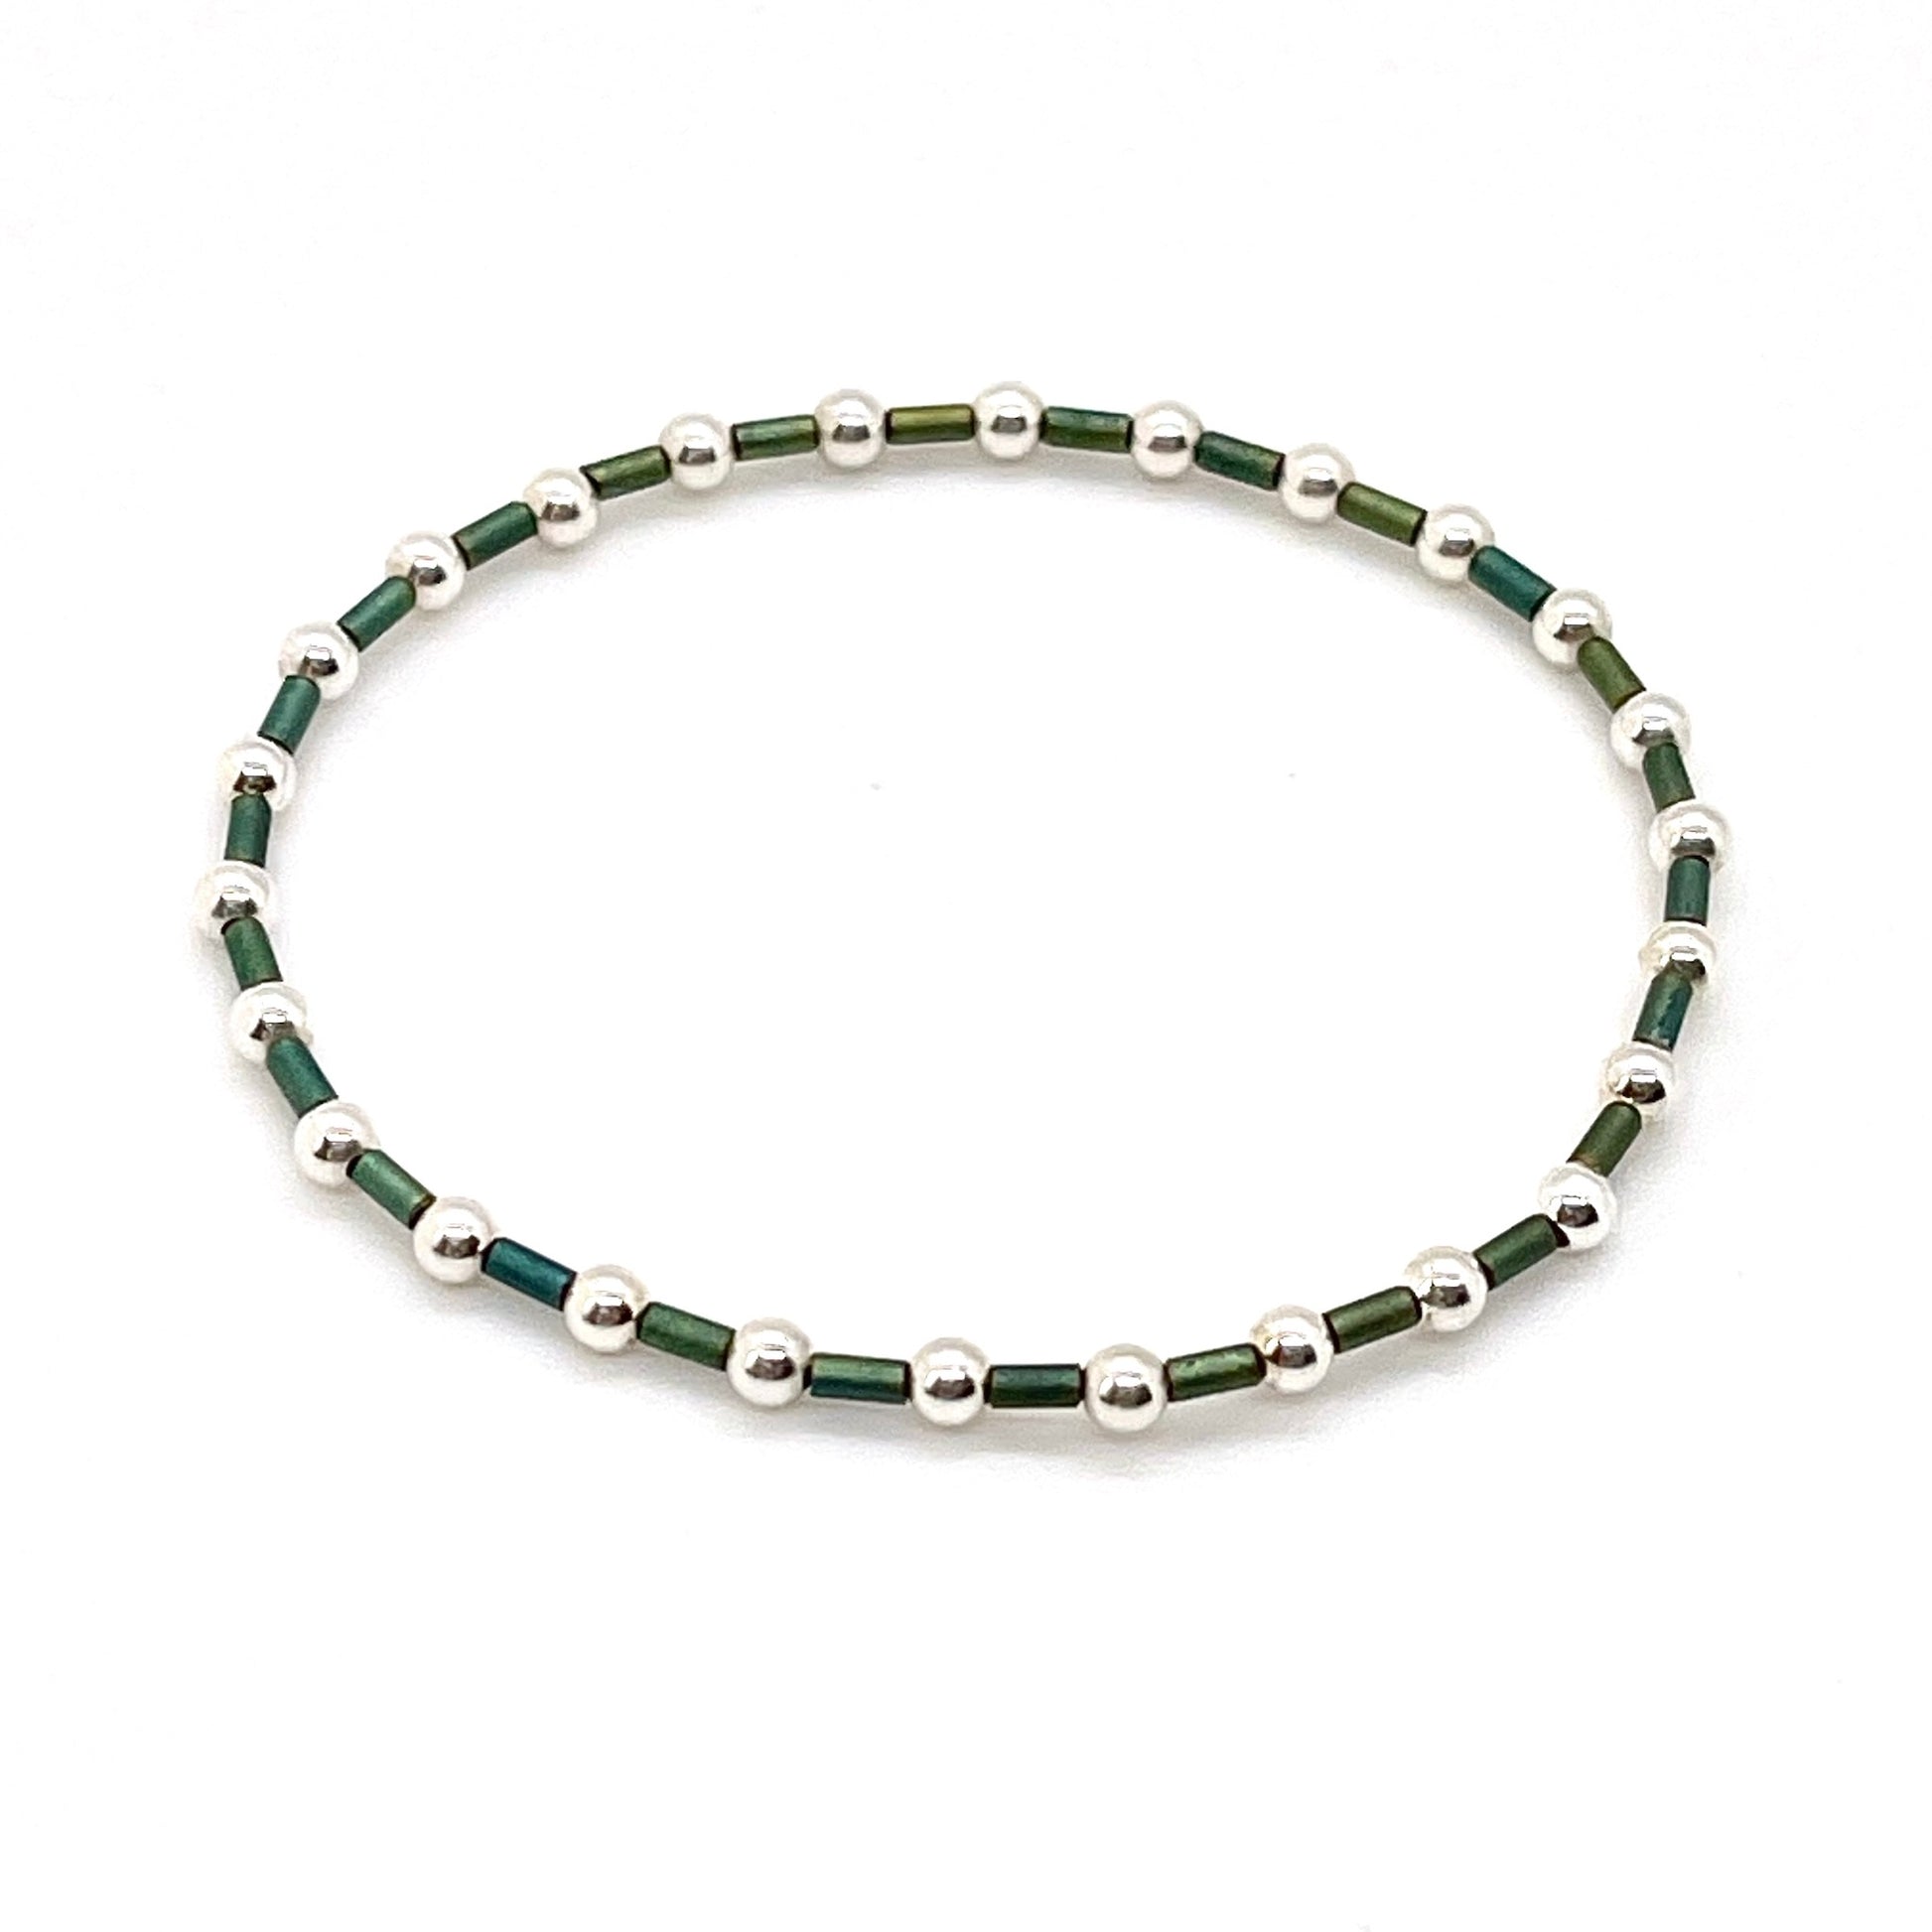 Green seed bead bracelet with 3mm round sterling silver beads on elastic stretch cord.